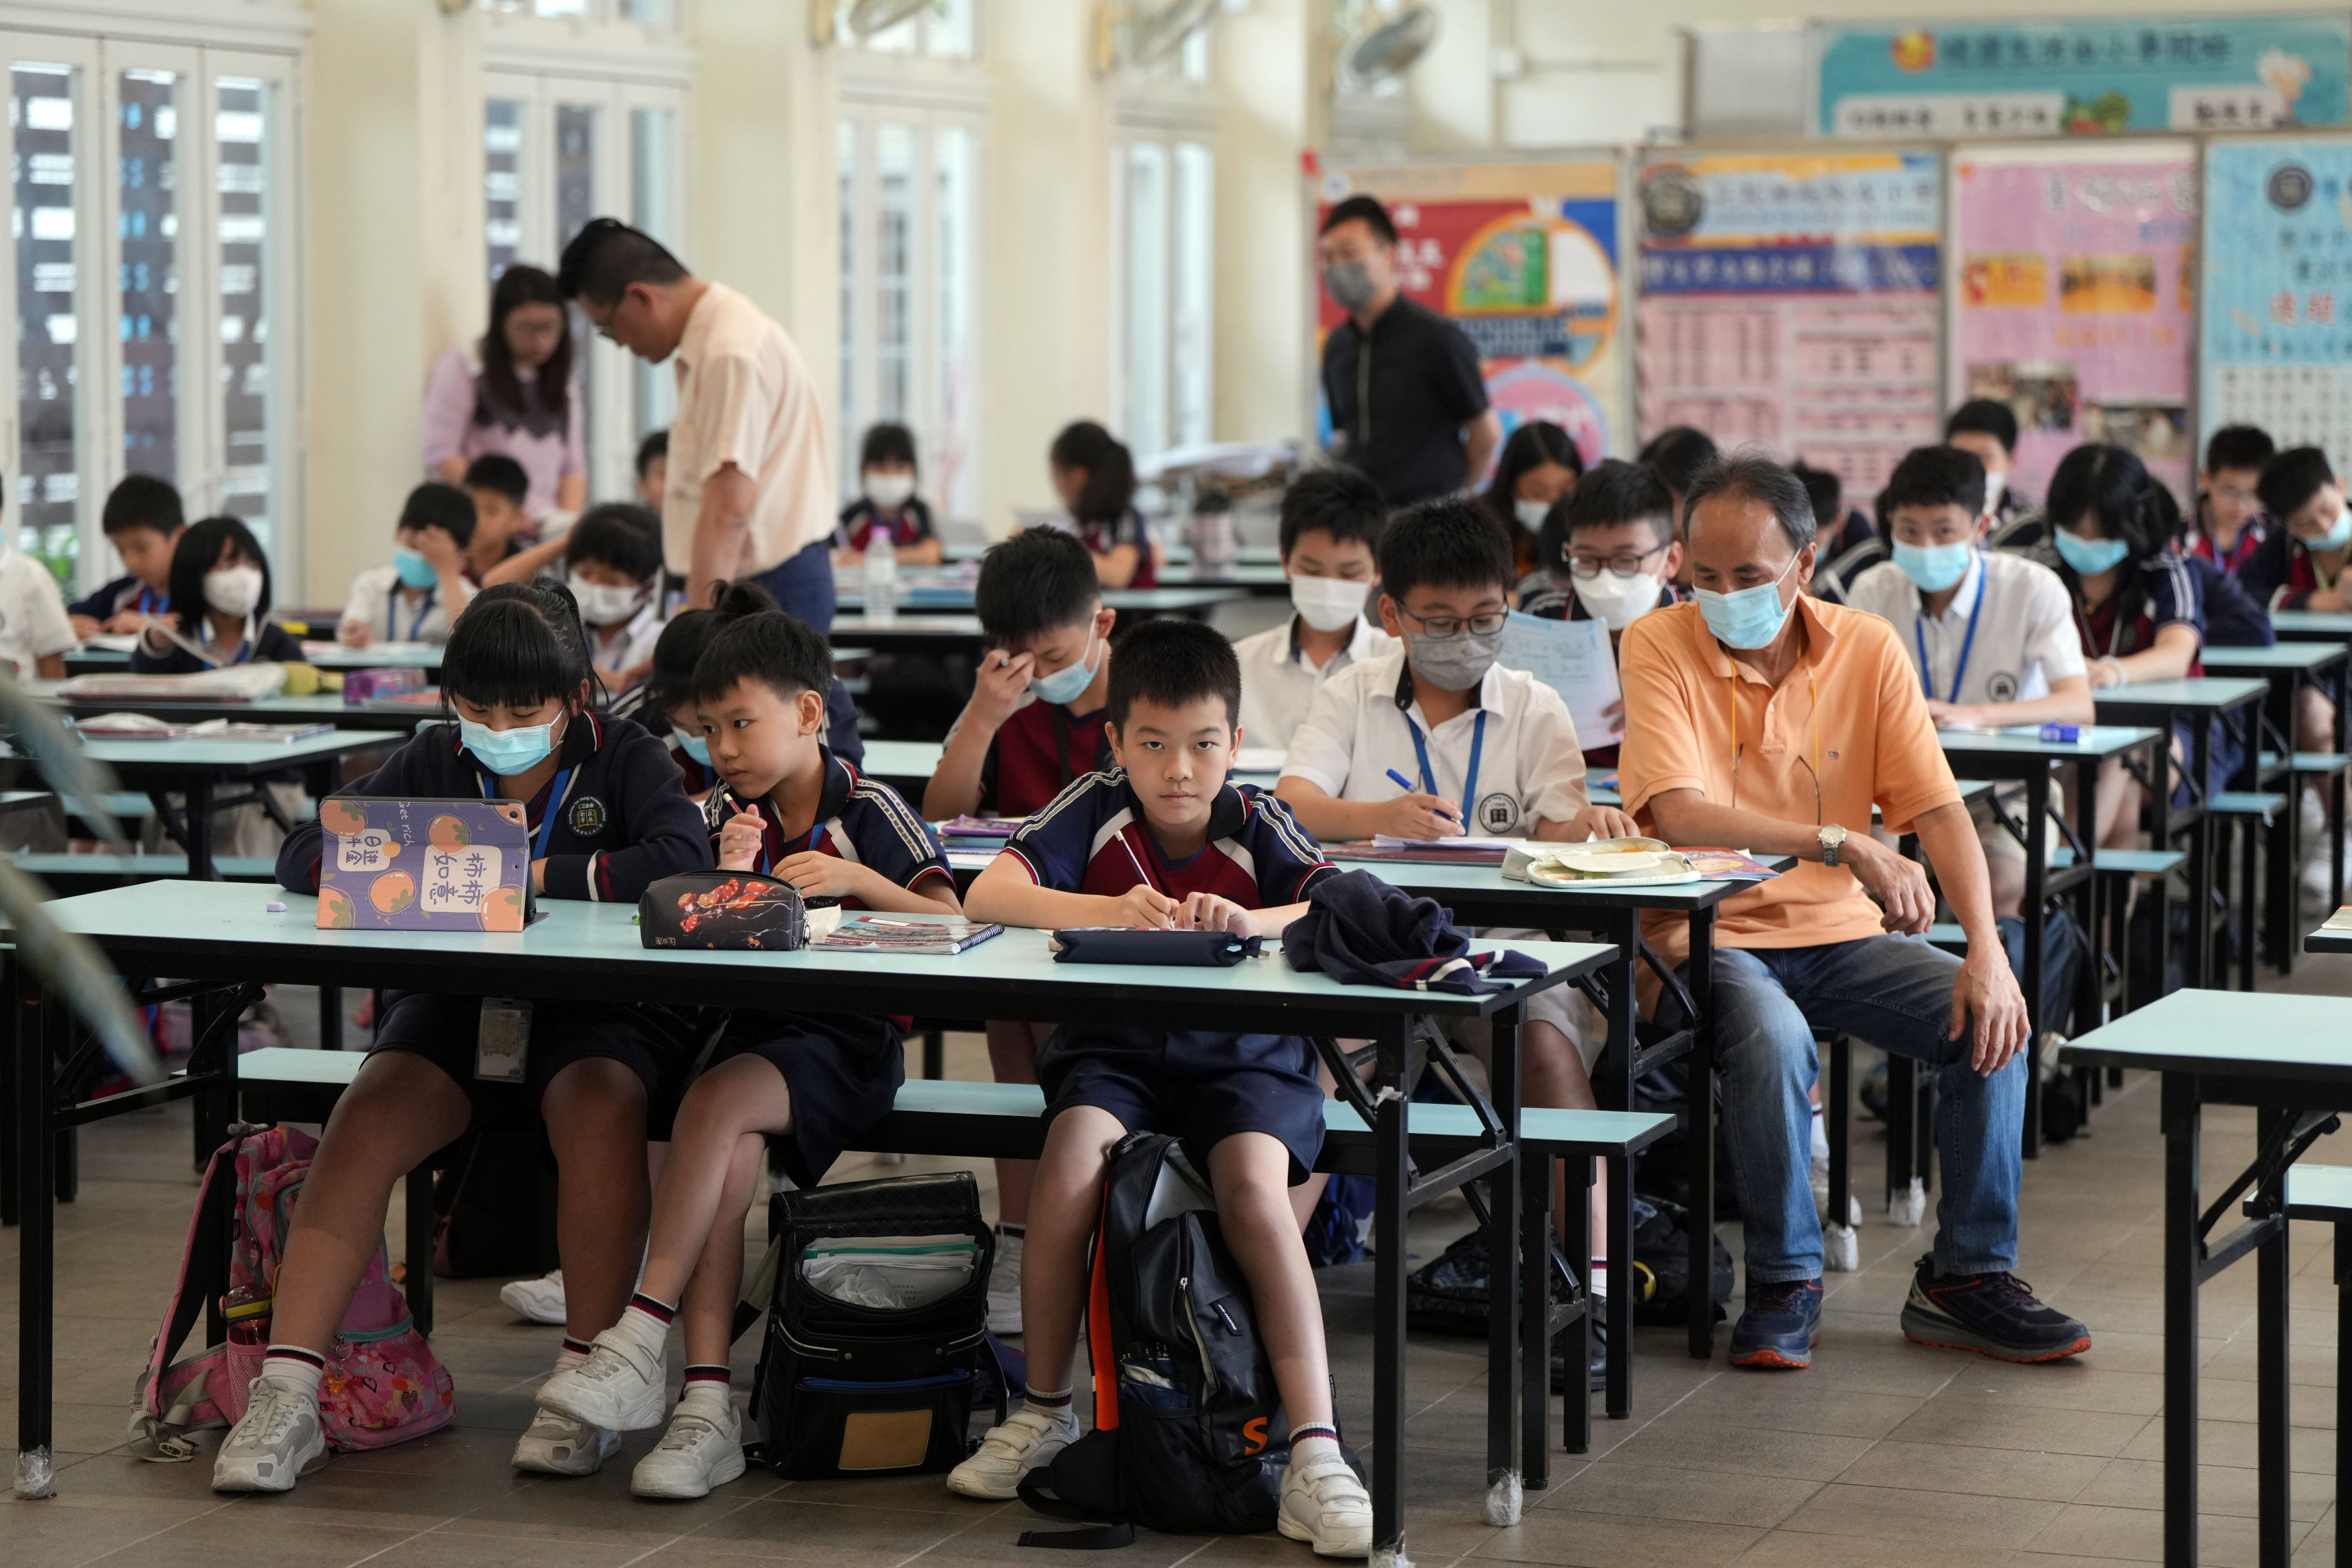 Students at Confucian Tai Shing Primary School in Wong Tai Sin on May 8. The school faced closure after failing to recruit enough new pupils, but has received permission to run a private Primary One class. Photo: Sam Tsang